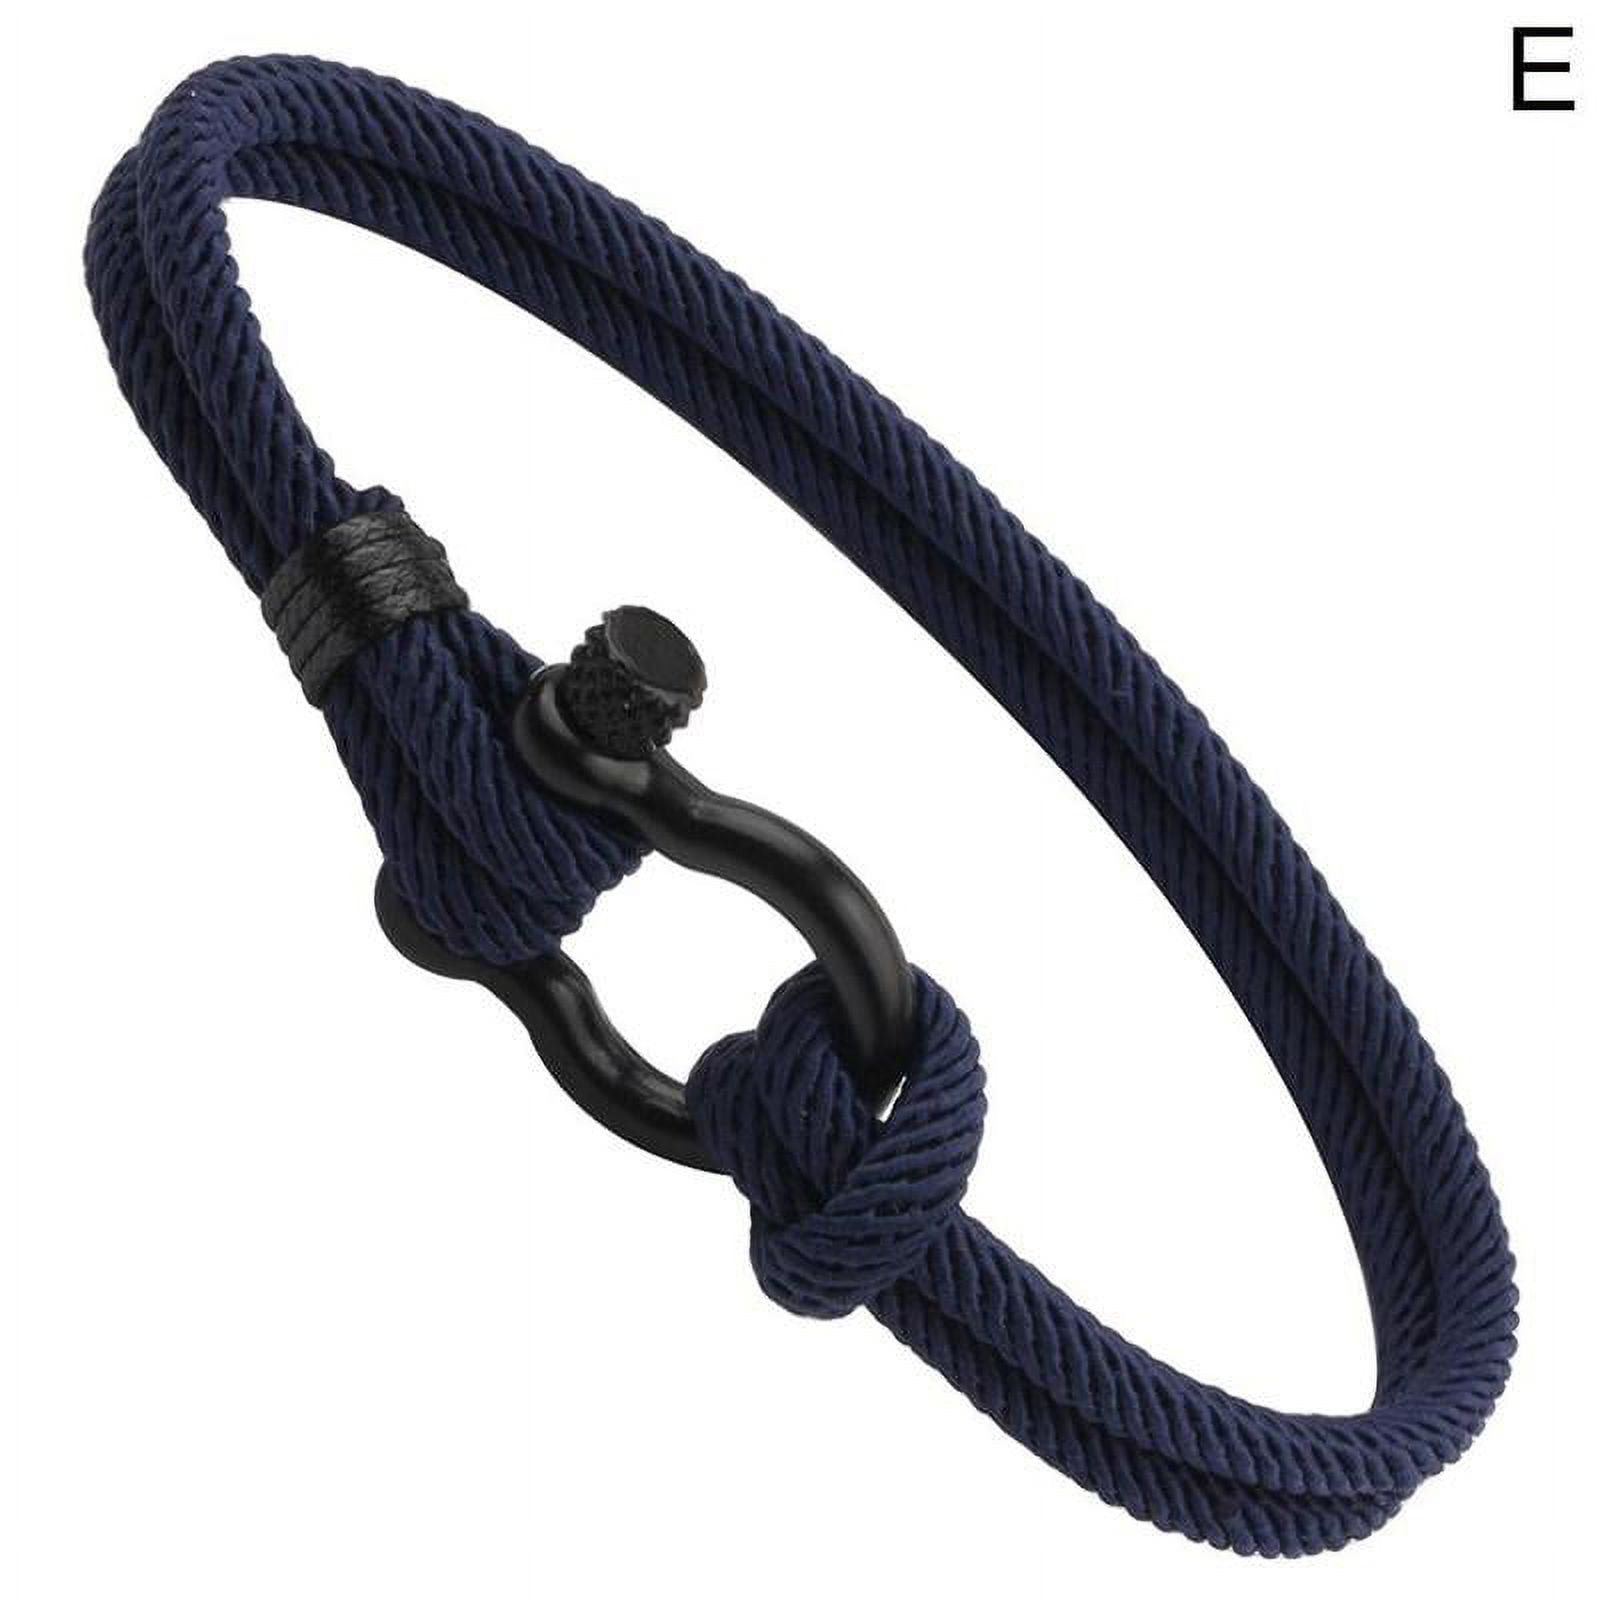 Survival Bracelet Outdoor Camping Rescue Rope Emergency U L3I7 NEW S O3C5